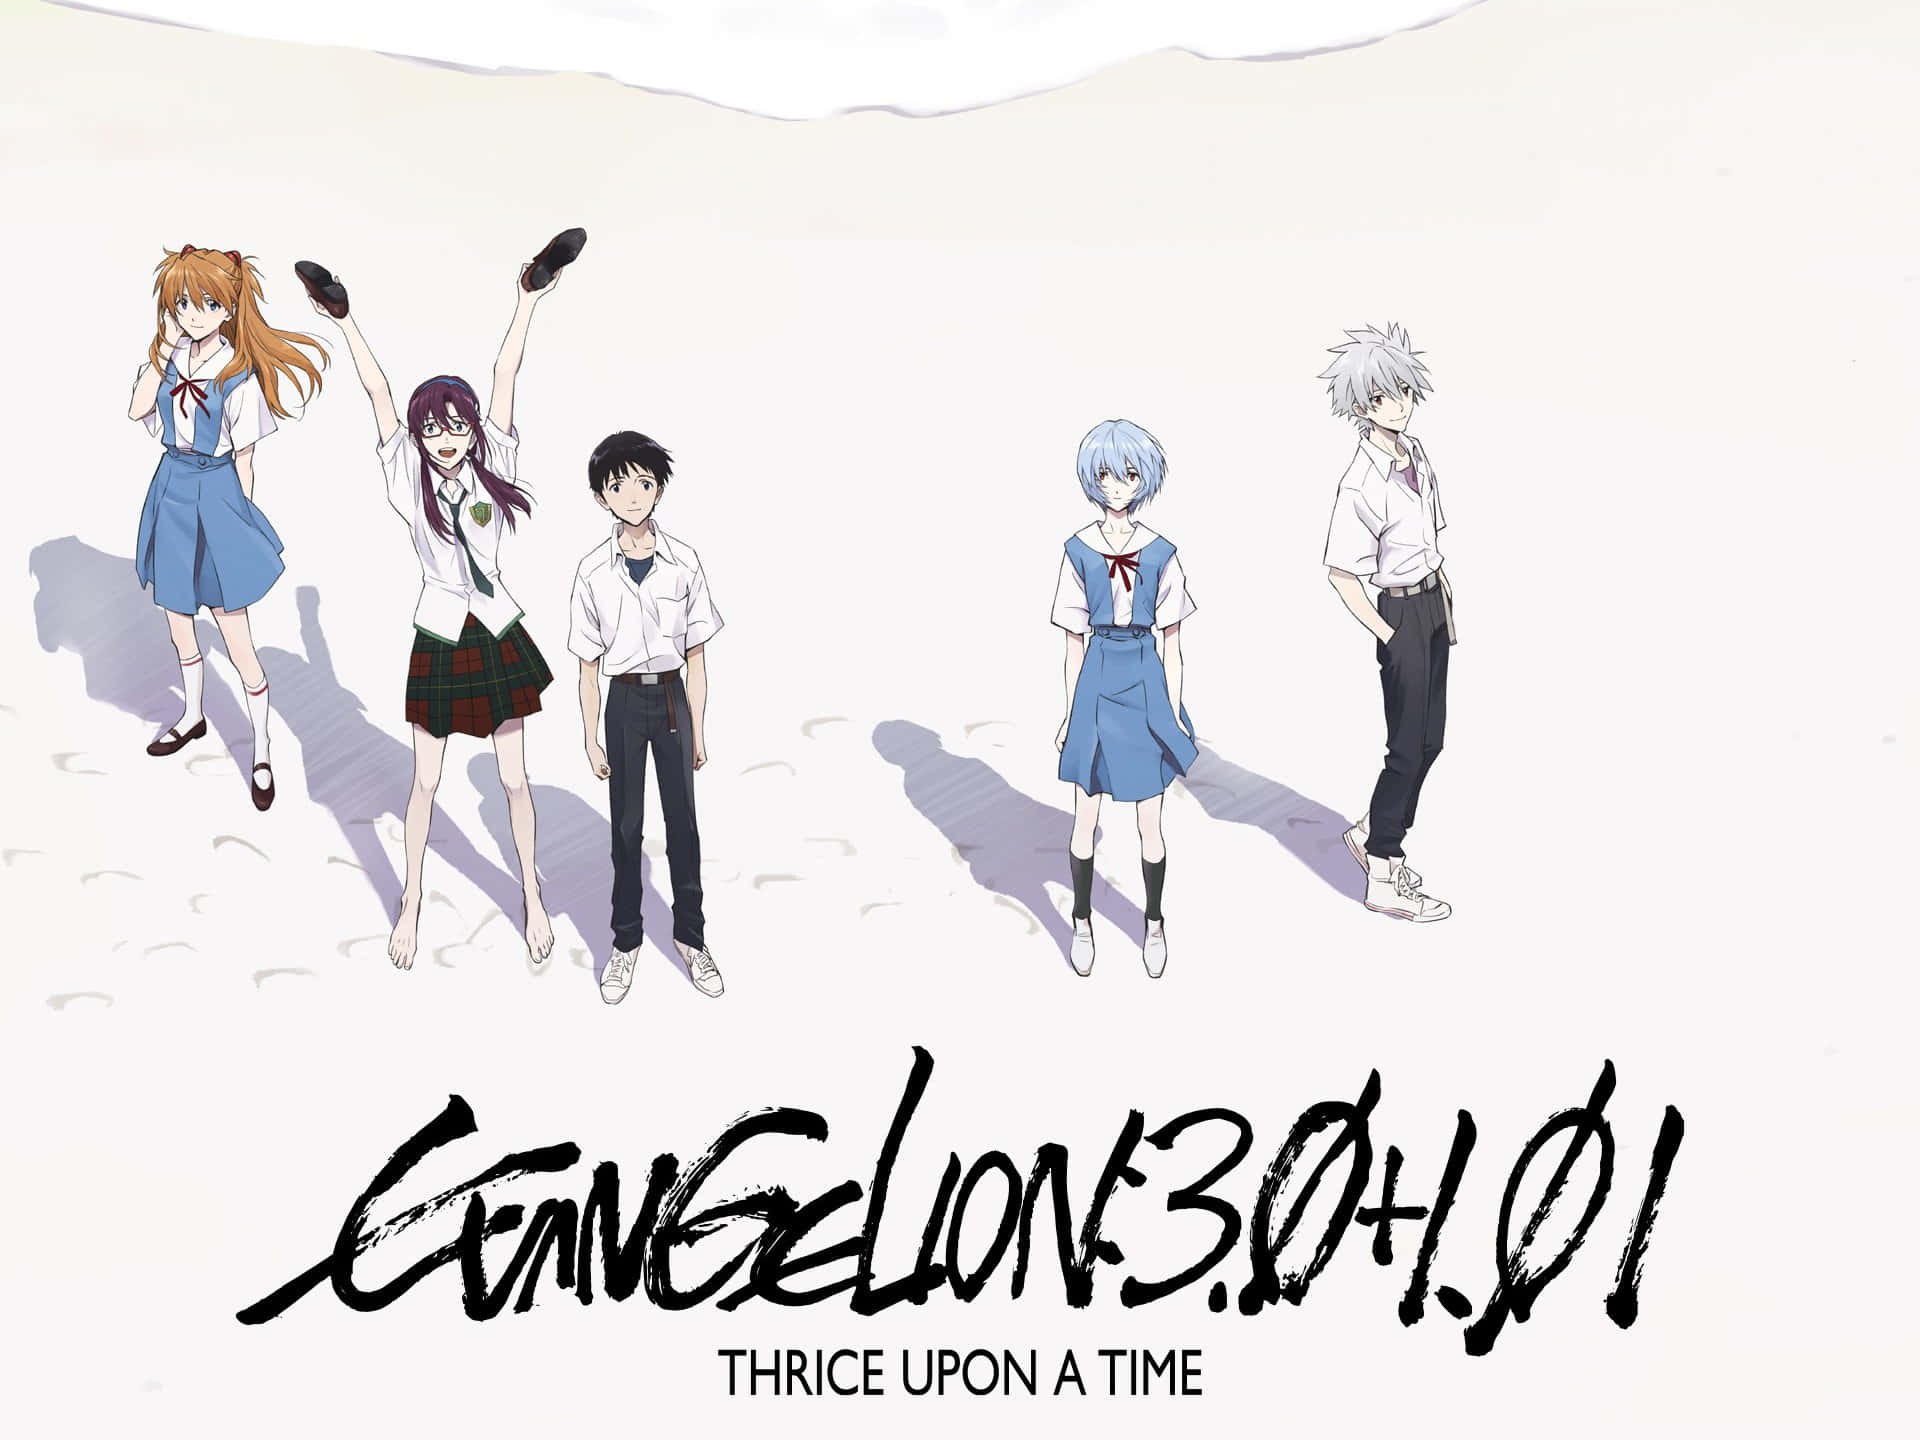 Enter a world of unseen possibilities with Evangelion 30 10 Wallpaper